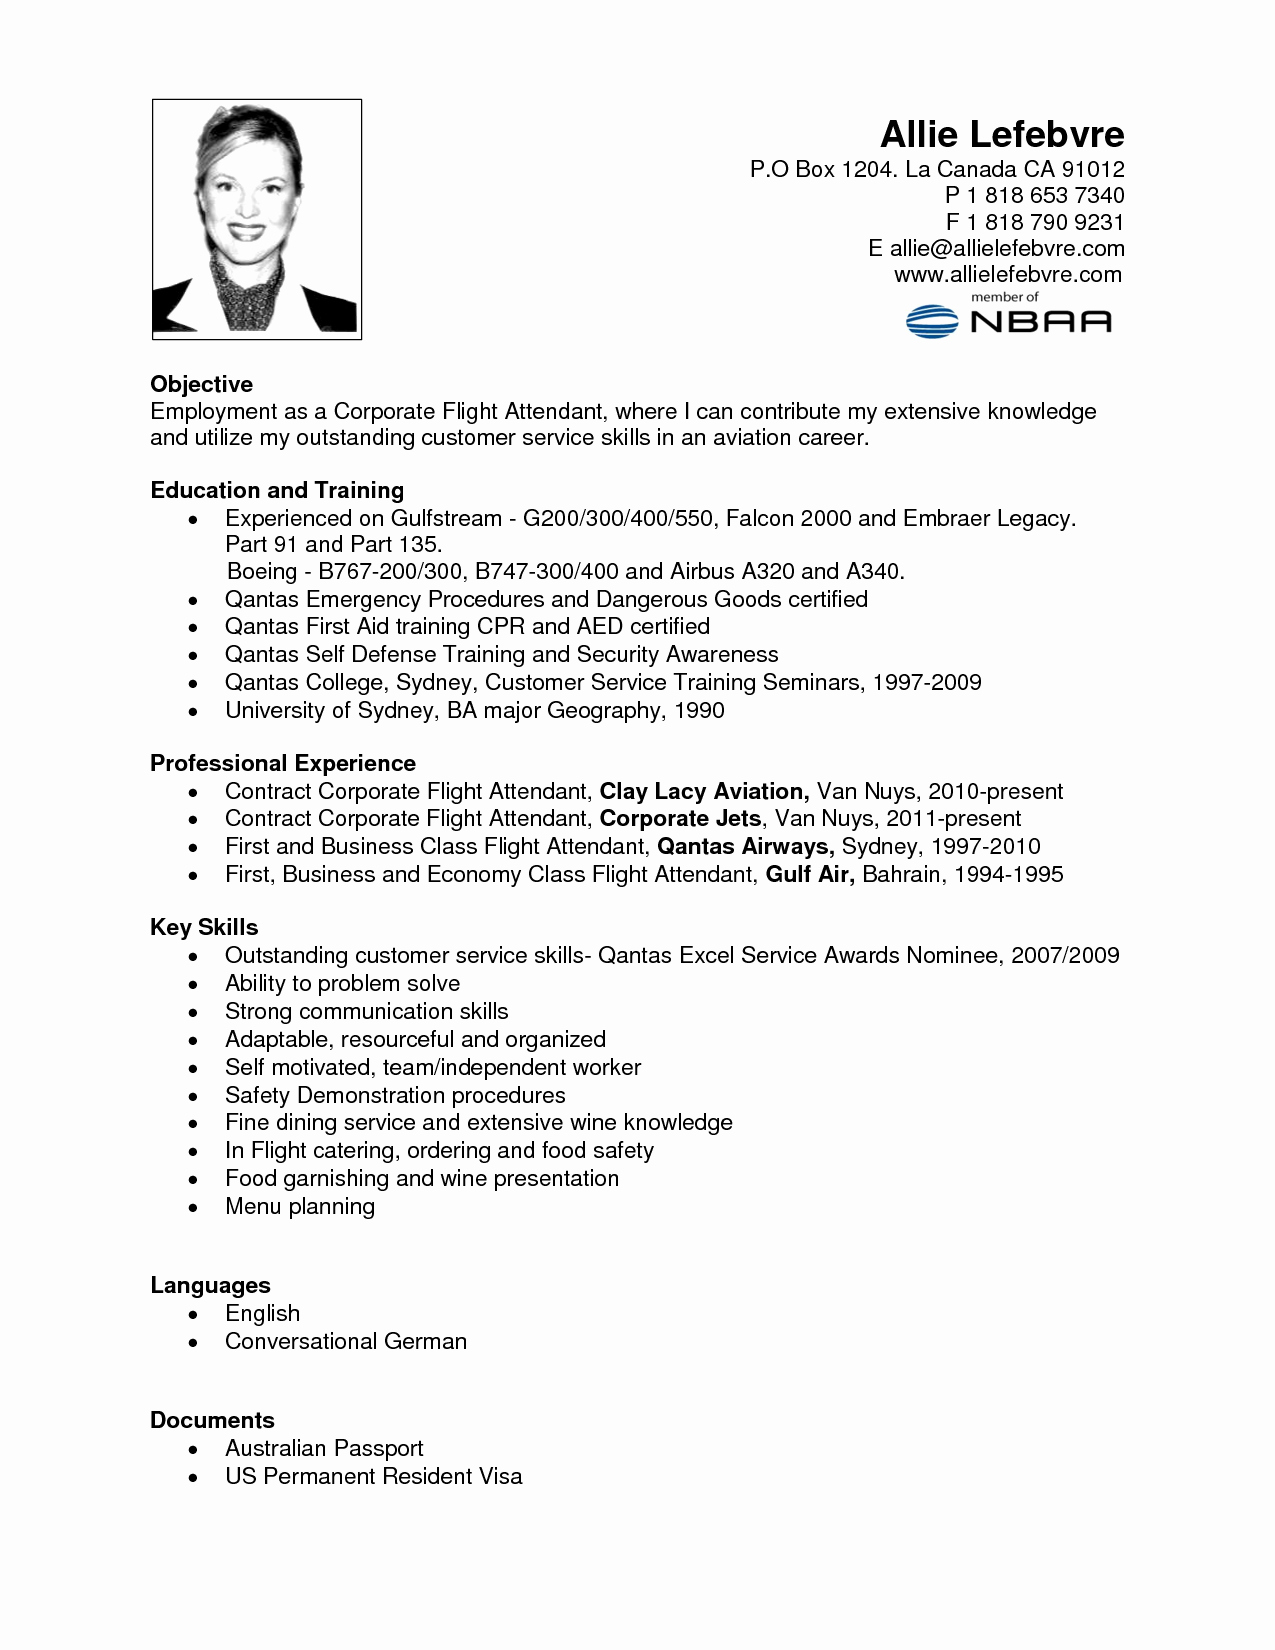 Resume Flight attendant without Experience Resume Ideas